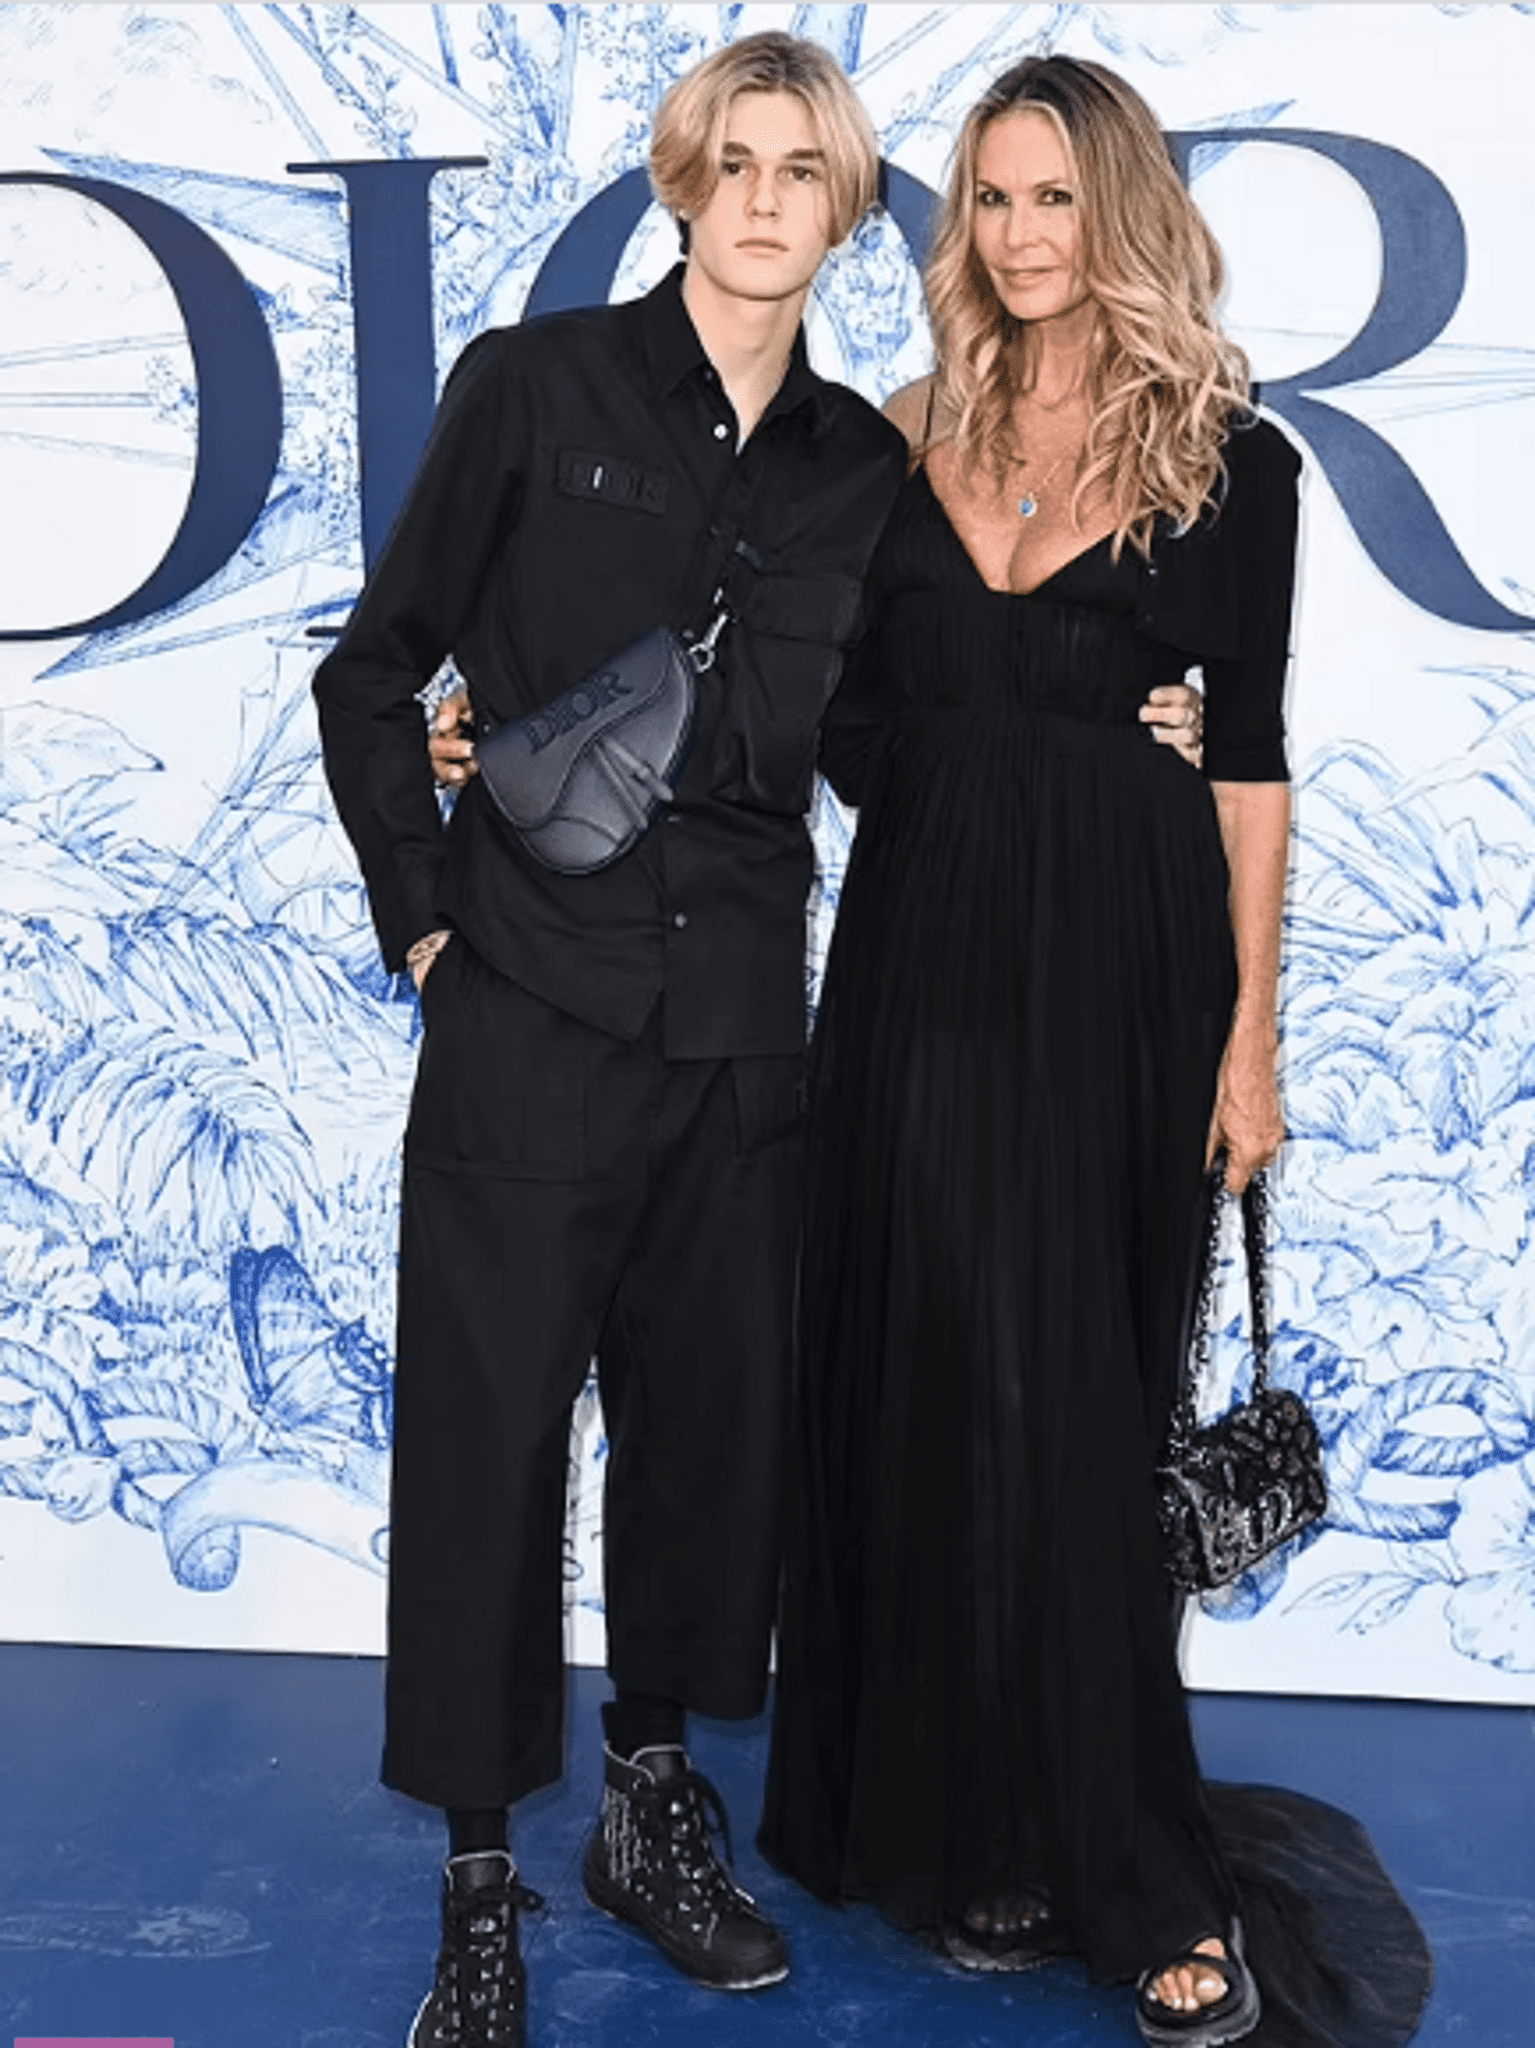 ”elle-macpherson-visited-the-dior-show-with-her-son-aurelius-say-andrea-busson”